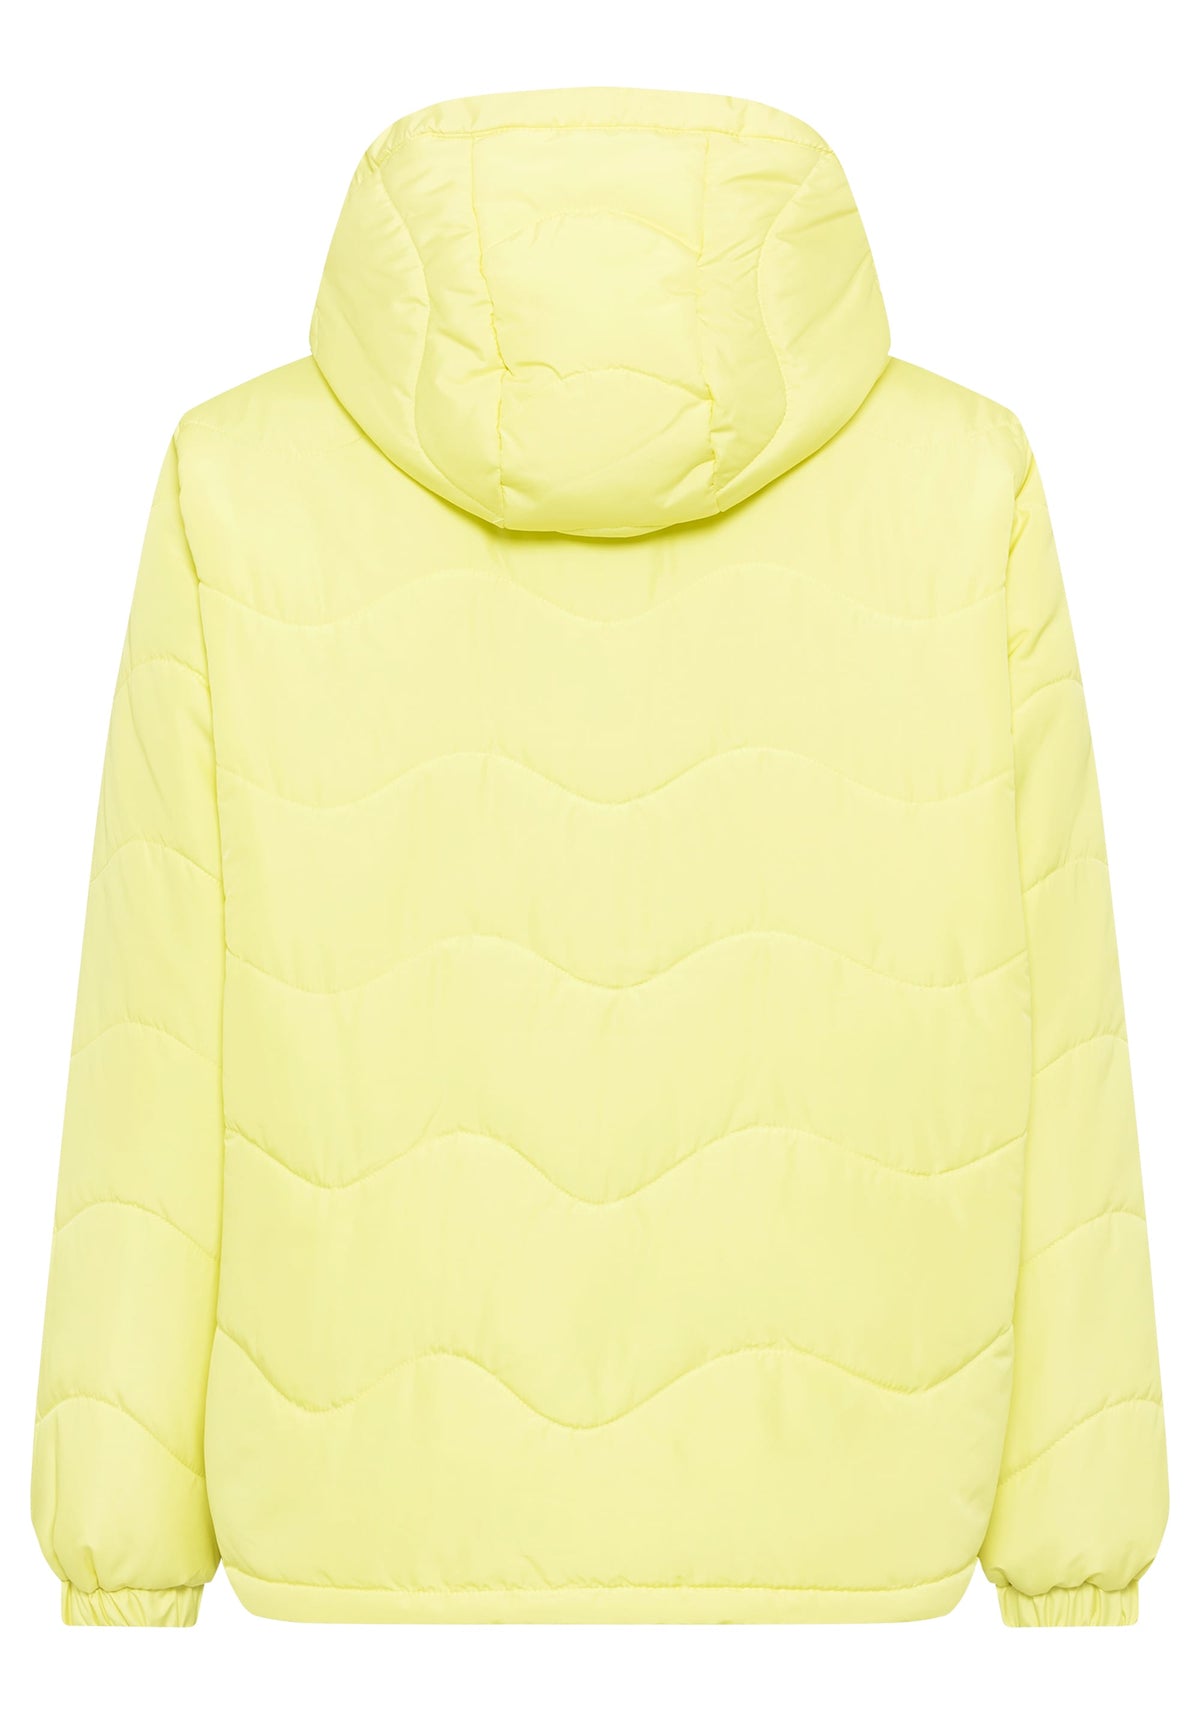 Long Sleeve Quilted Jacket with Hood containing REPREVE®